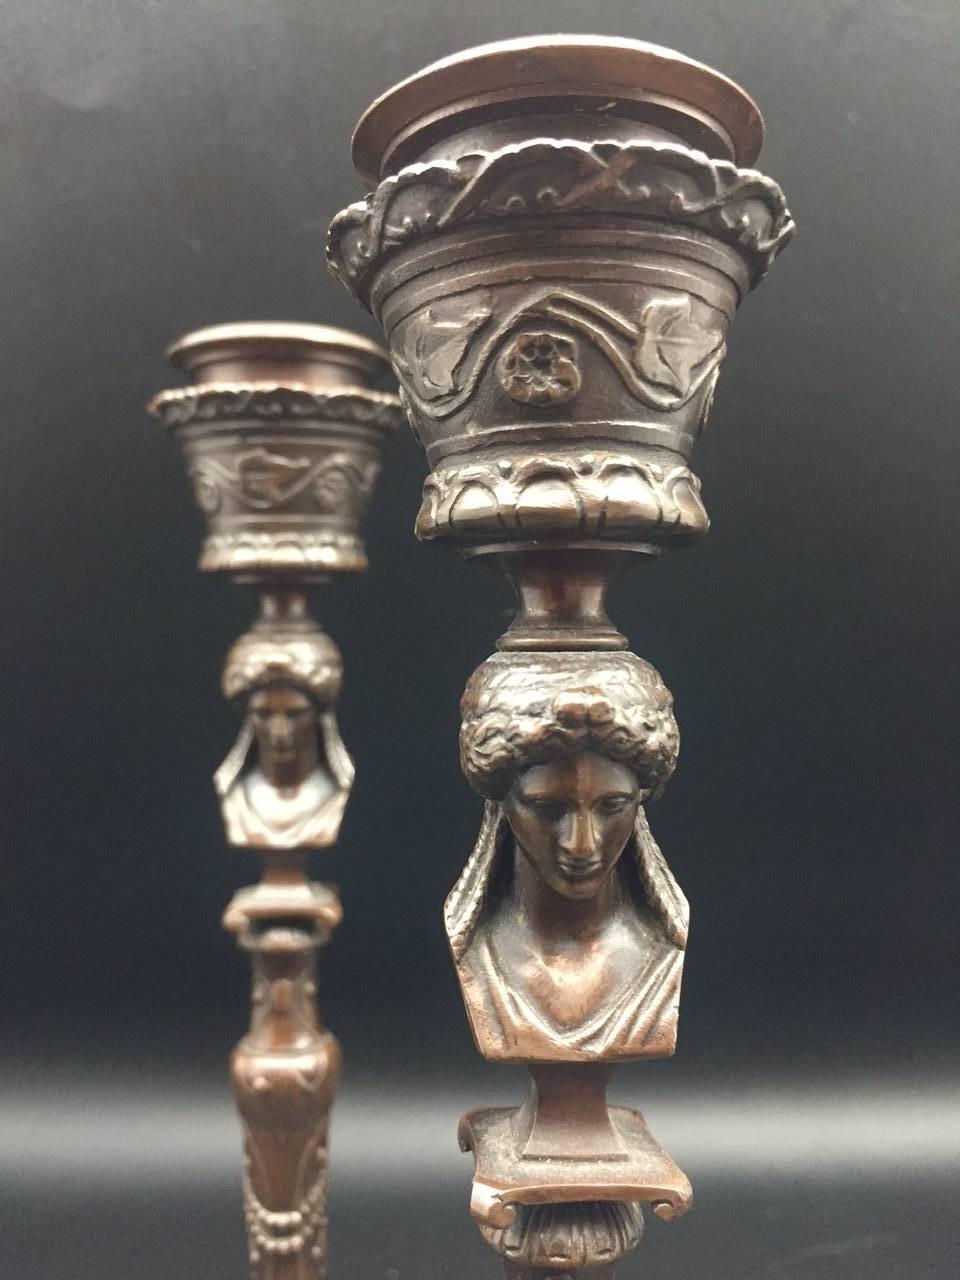 A beautiful pair of French 19th century bronze candlesticks with the Barbedienne foundry stamp. Each candlesticks are of pedestal form, decorated with swags and scrolls of vines, flowers and leaves, surmounted by the bust of Minerva, the Roman